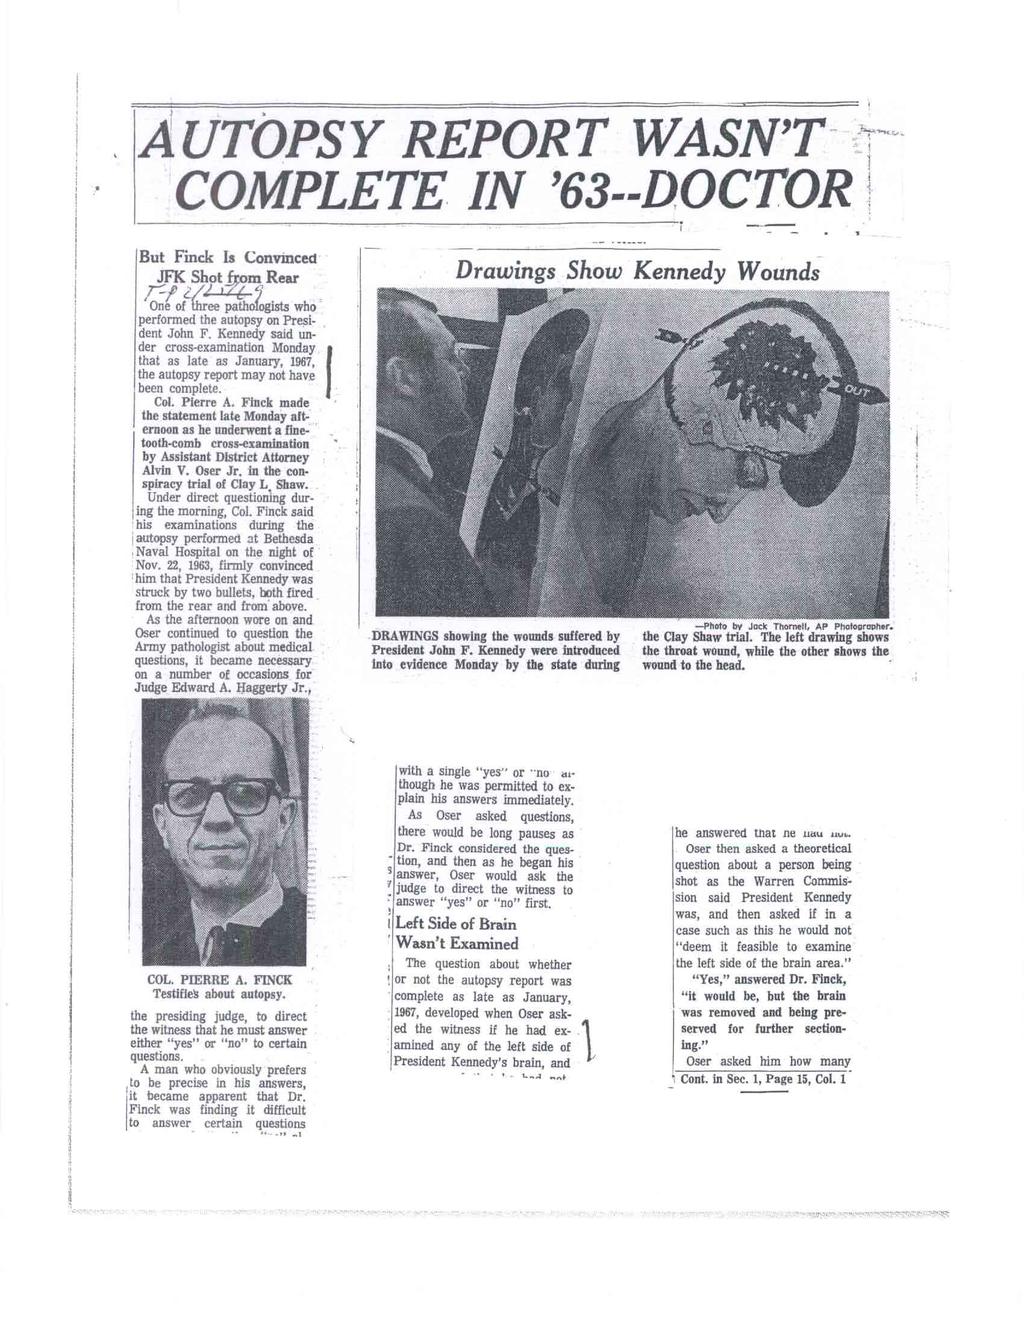 AUTOPSY REPORT WASN'T COMPLETE IN '63-DOCTOR But Finck Is Convinced JFK Shot from Rear 4/1 )/ ( One of three pathologists who performed the autopsy on President John F.